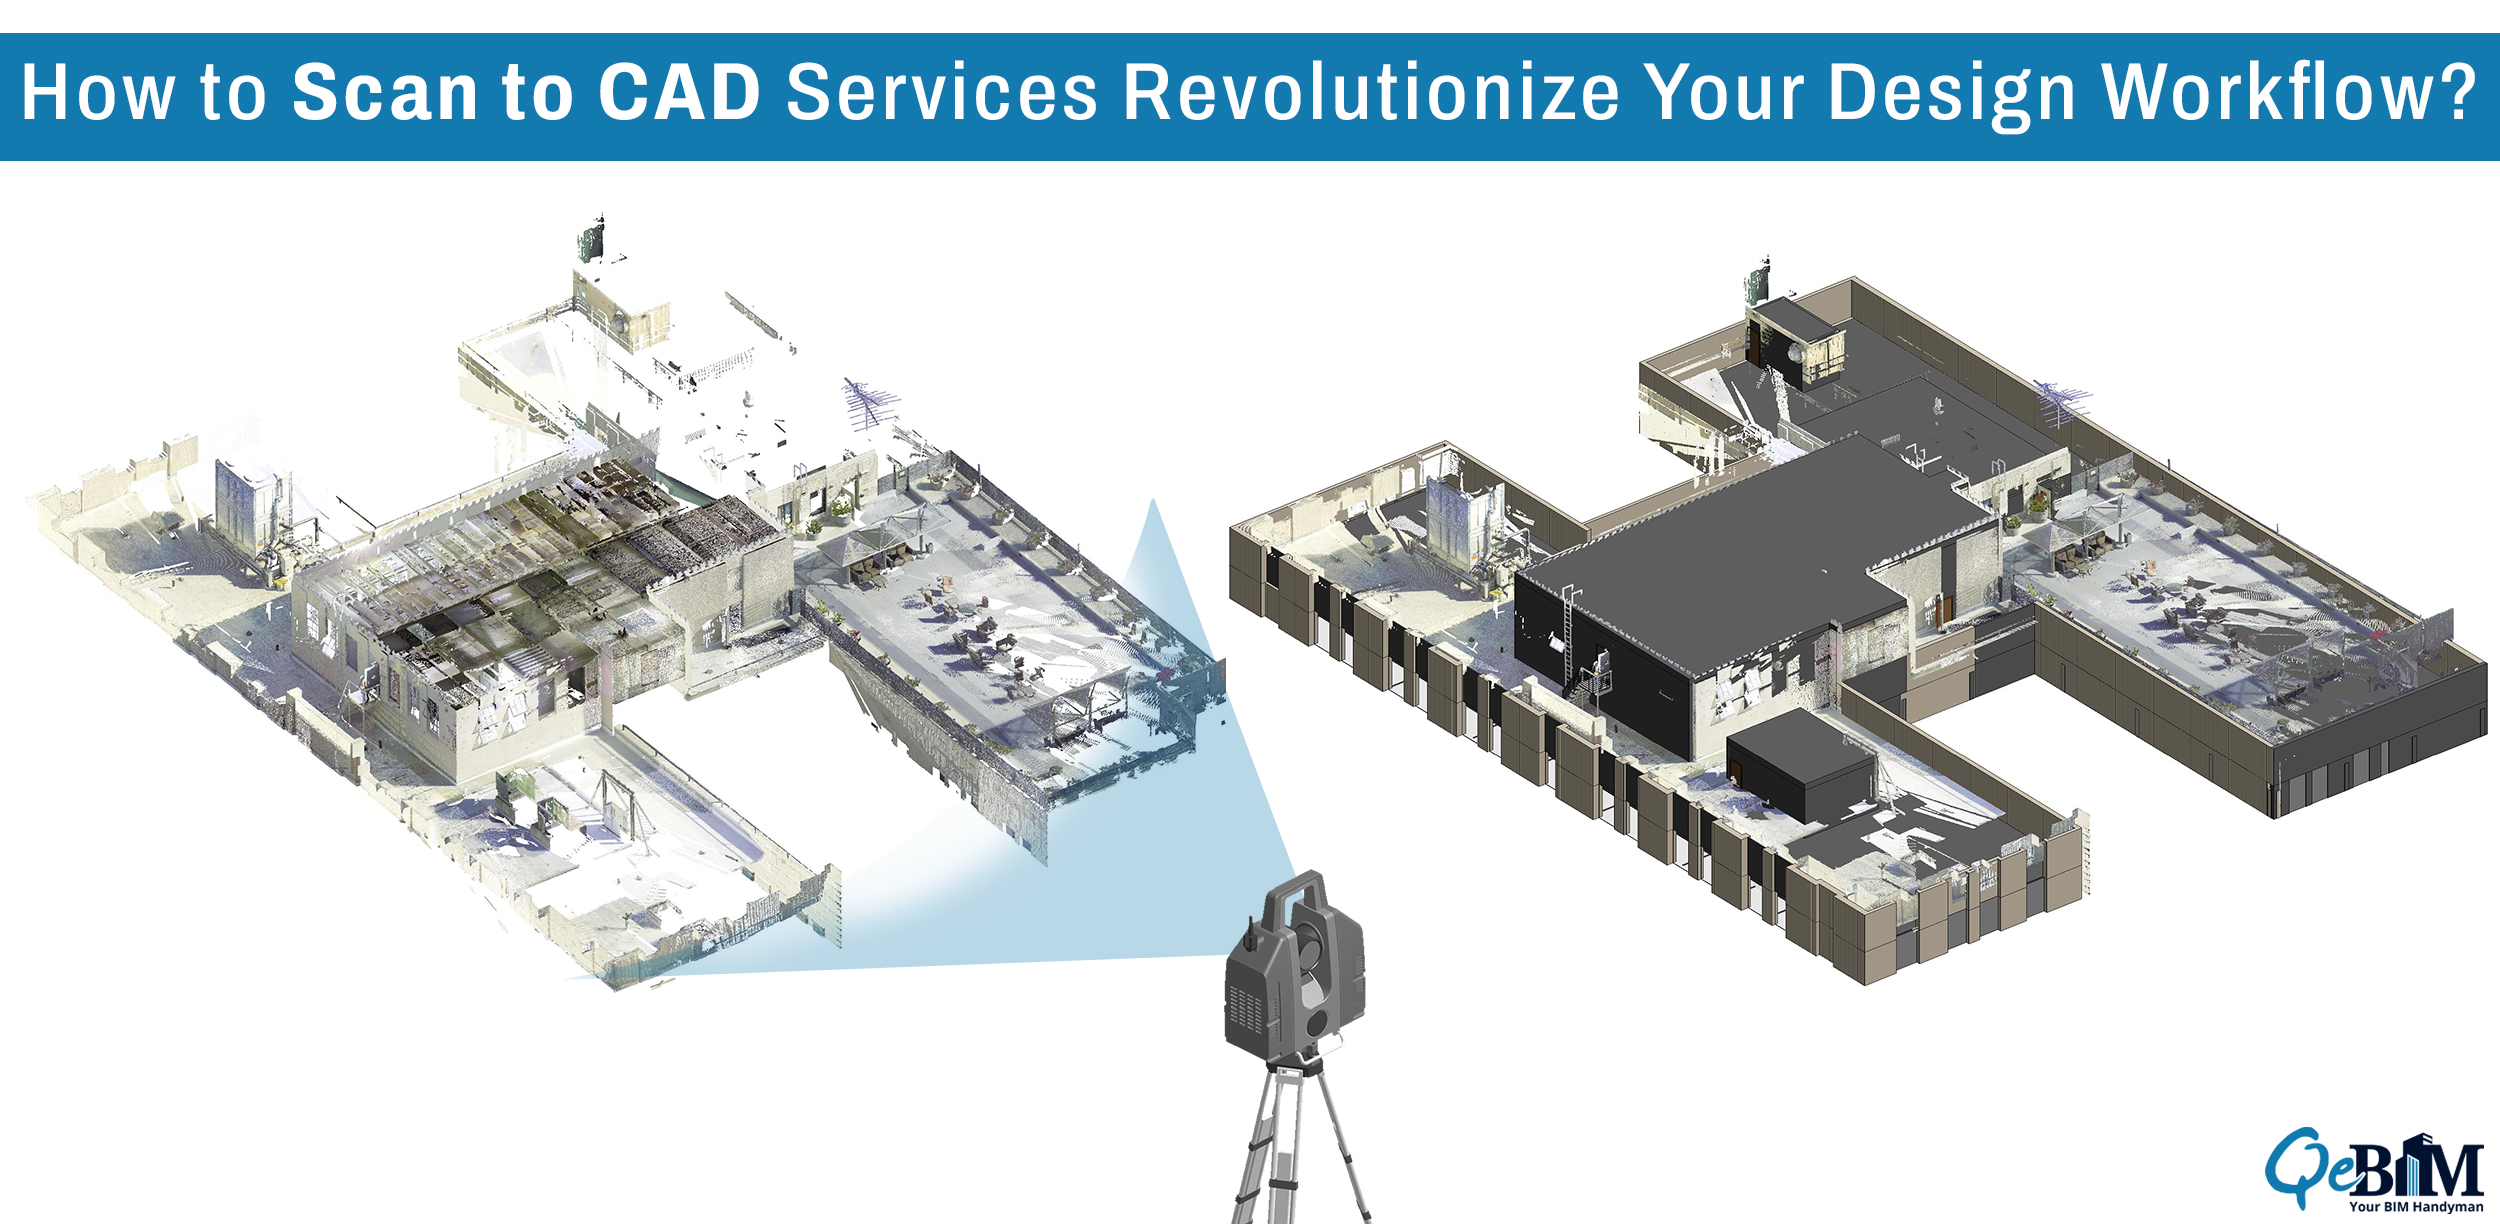 How to Scan to CAD Services Revolutionize Your Design Workflow